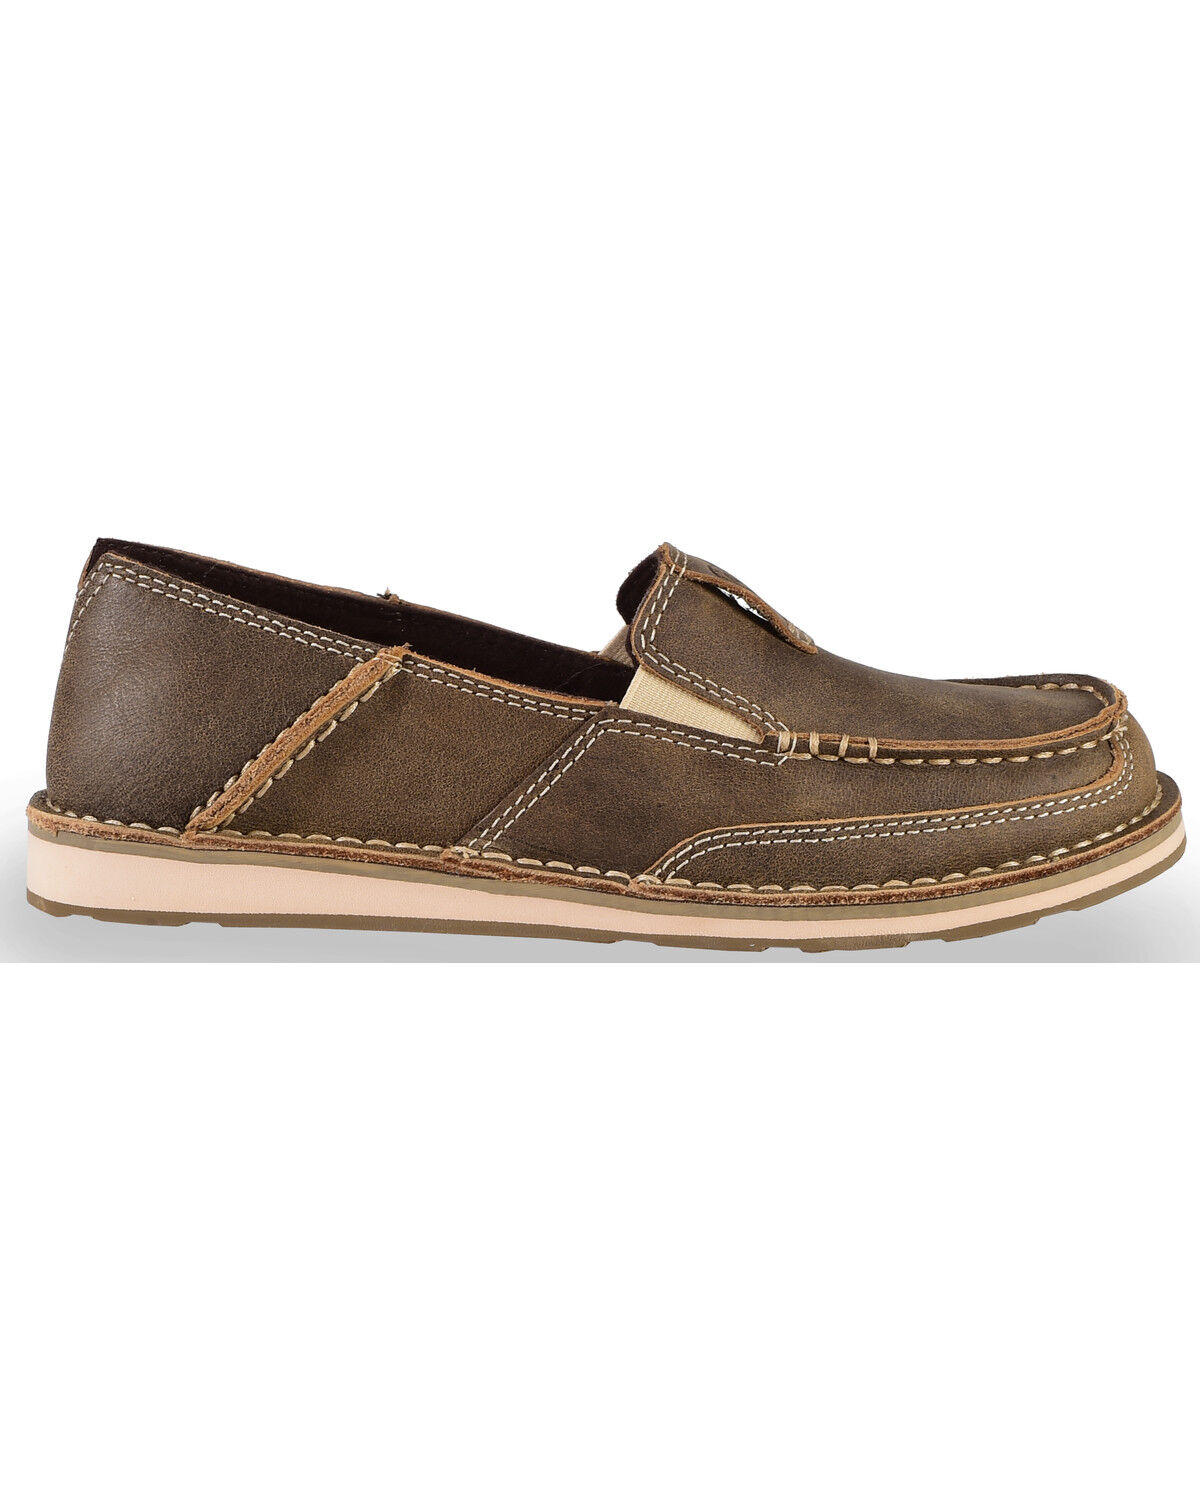 ariat cruisers on sale